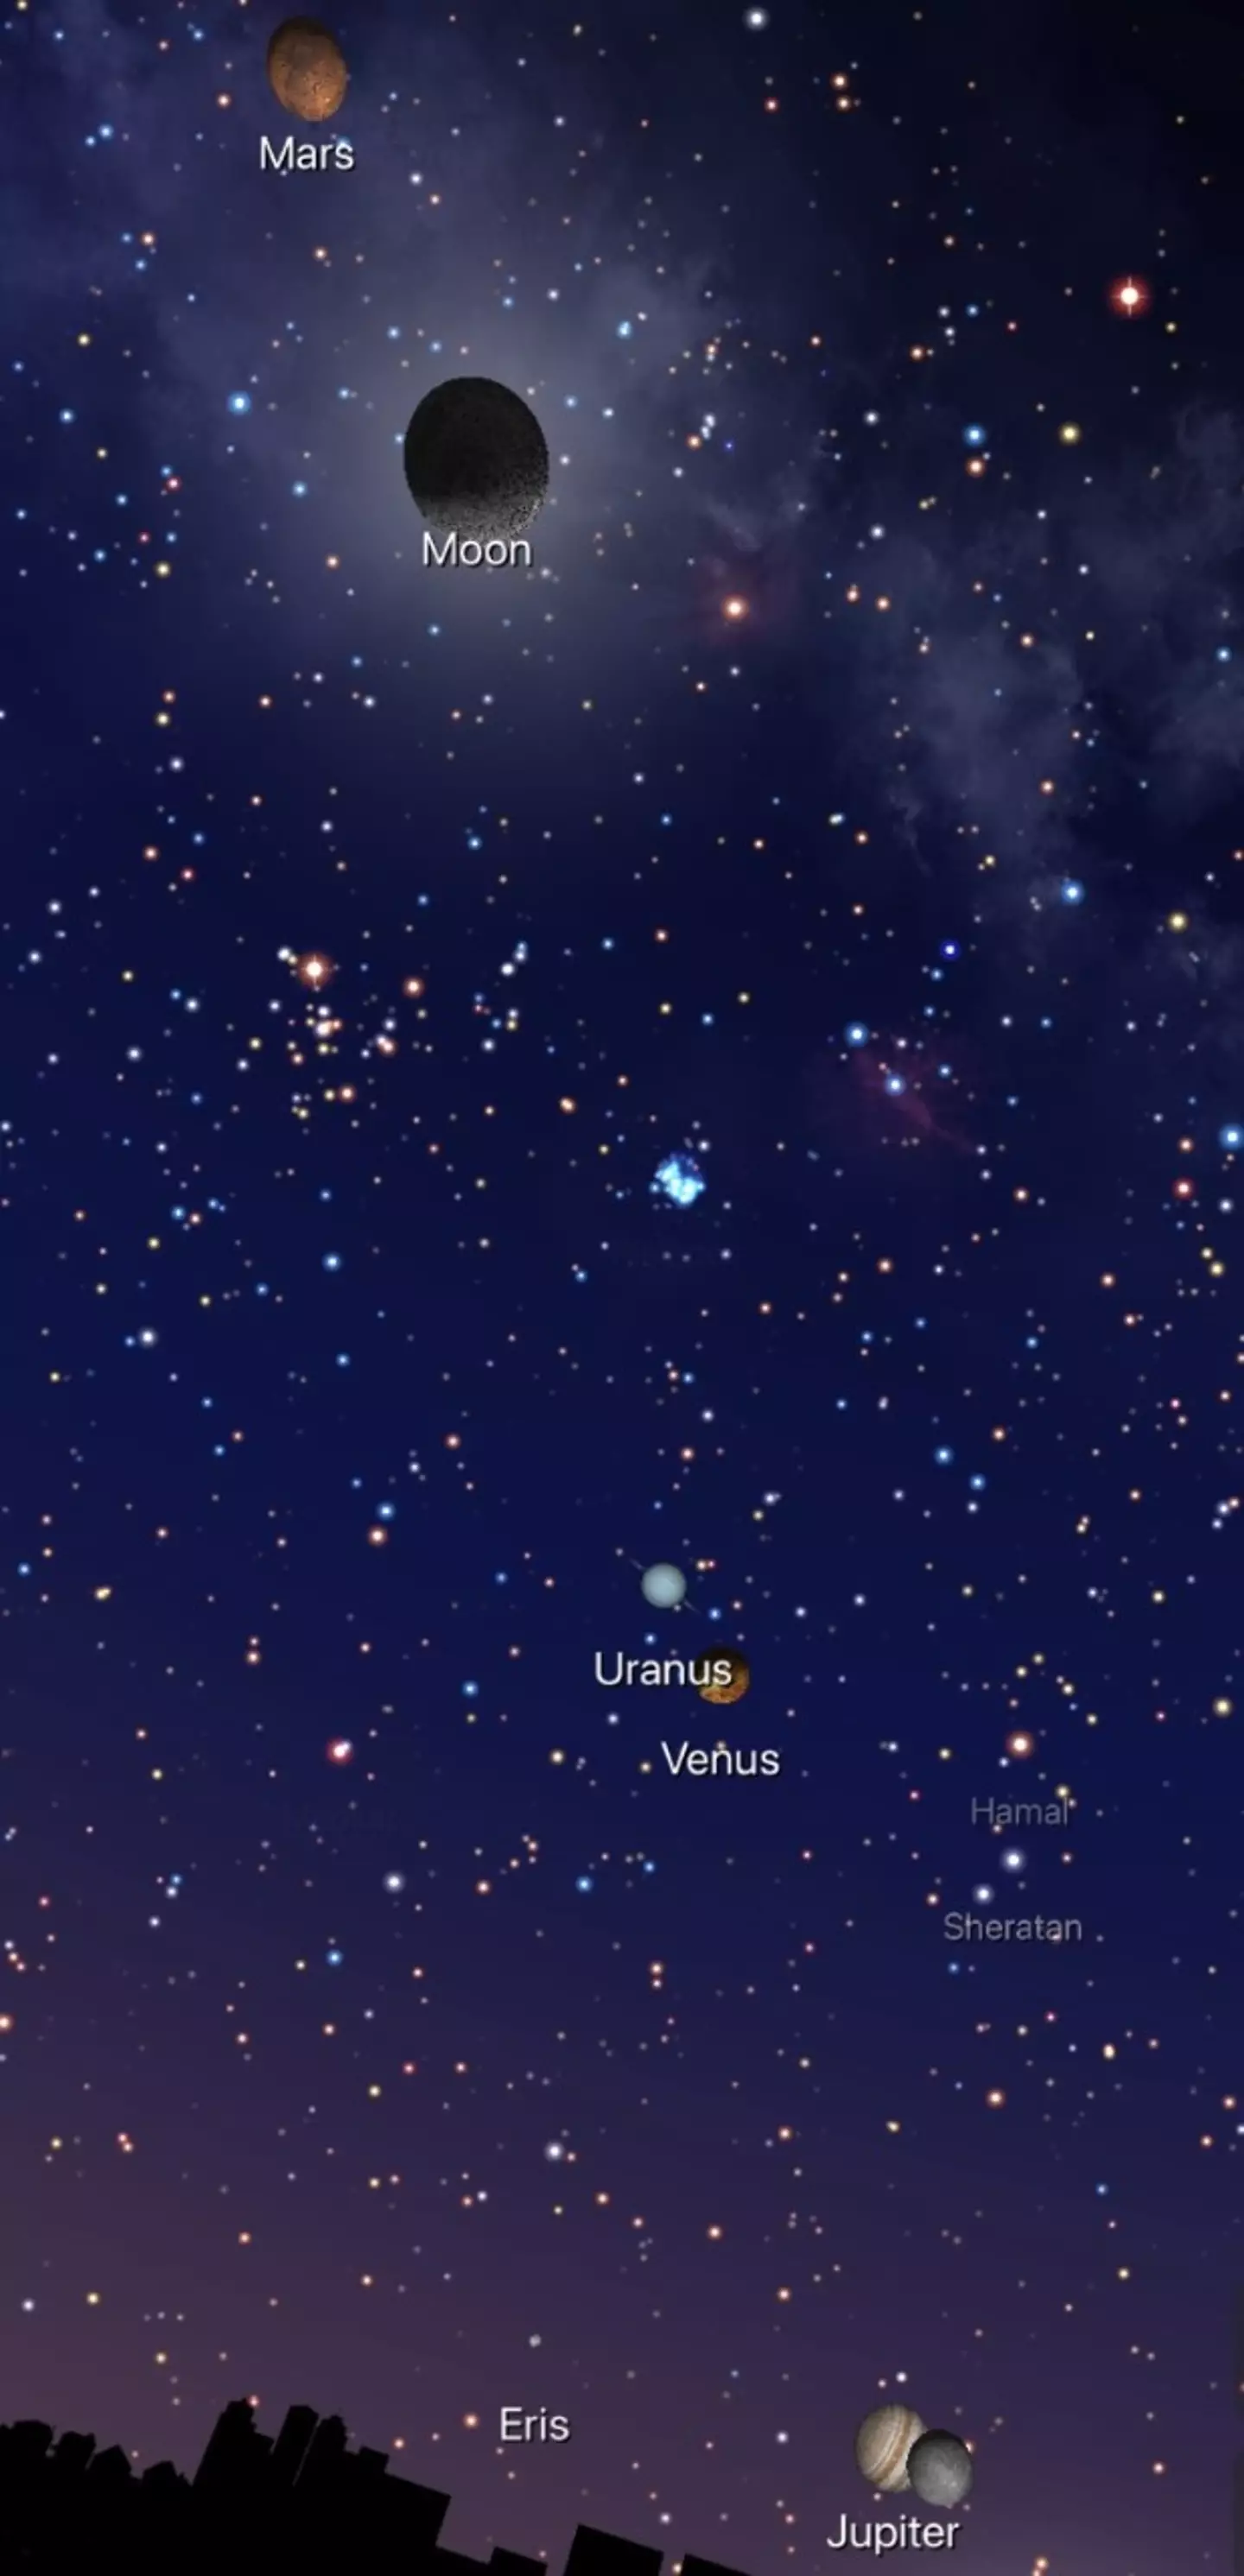 Five planets and the Moon will be aligned in the night's sky, make sure you get a good look at Uranus.